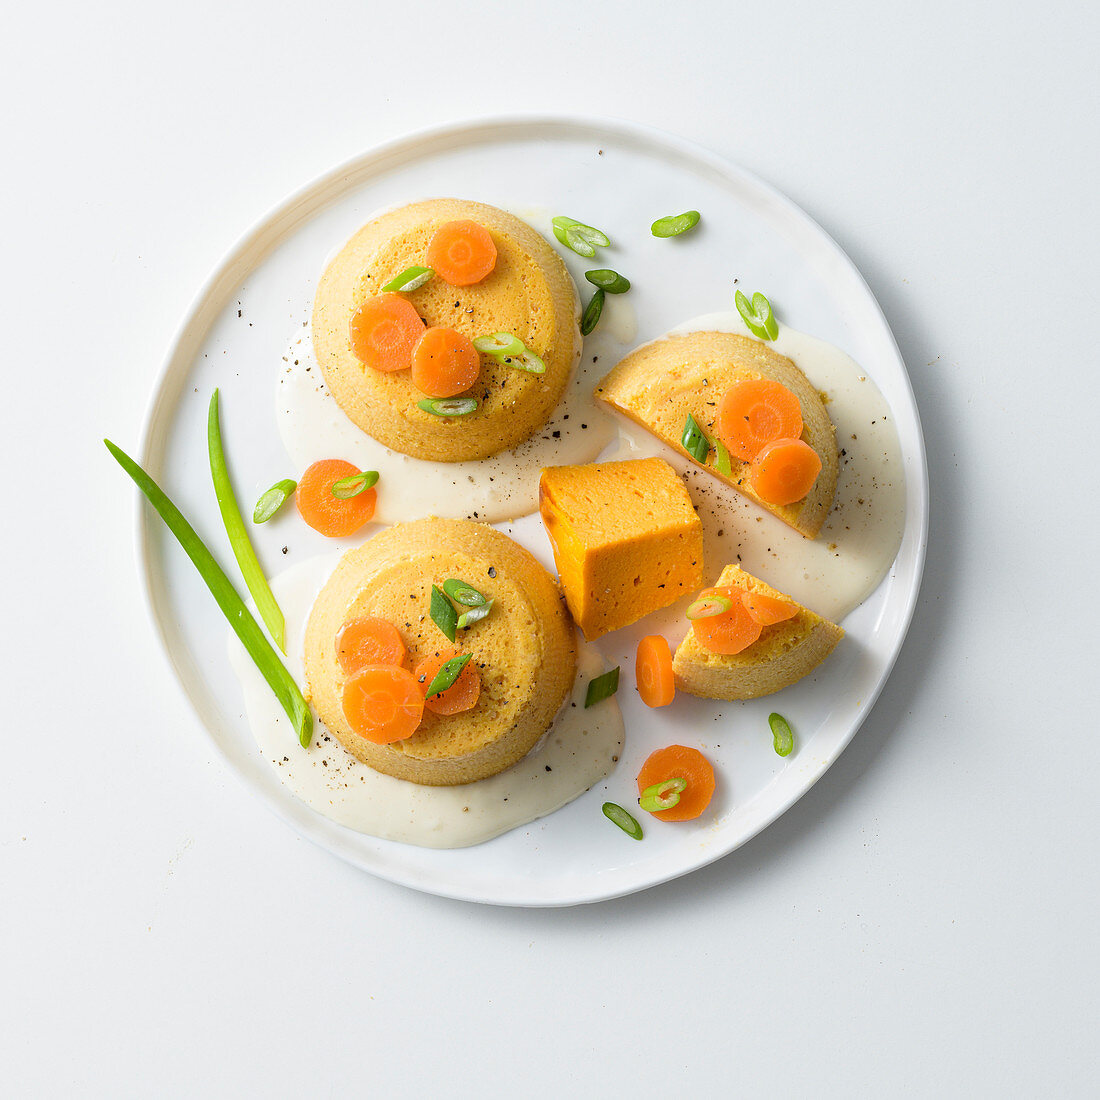 Carrot flans with spring onions and cheese sauce